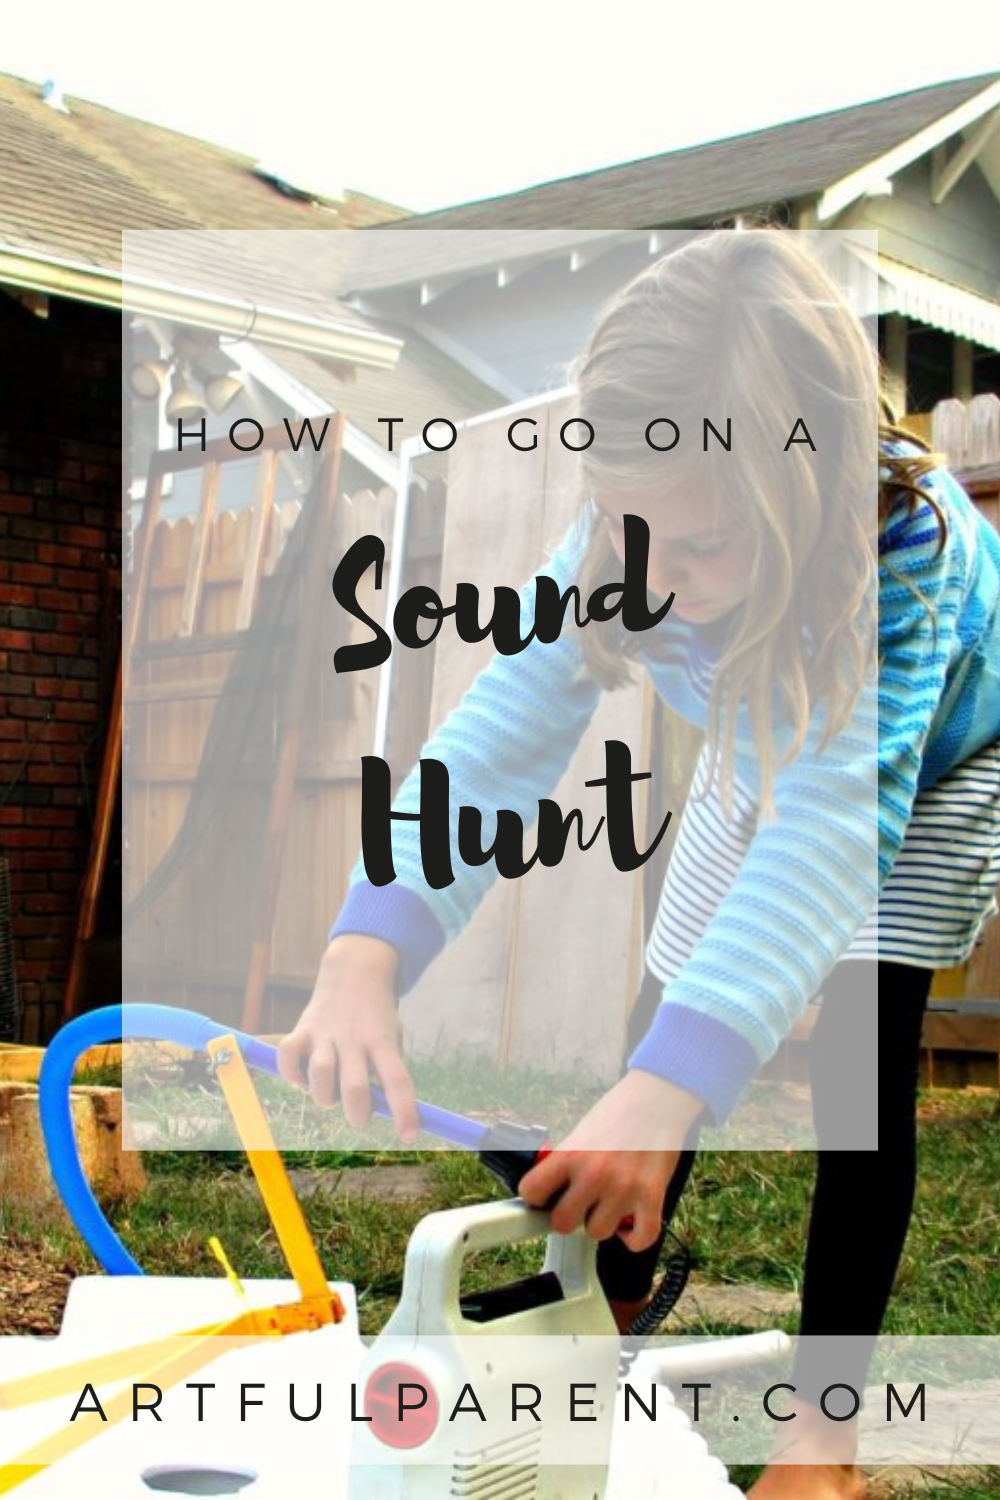 How to Go on a Sound Hunt with Kids